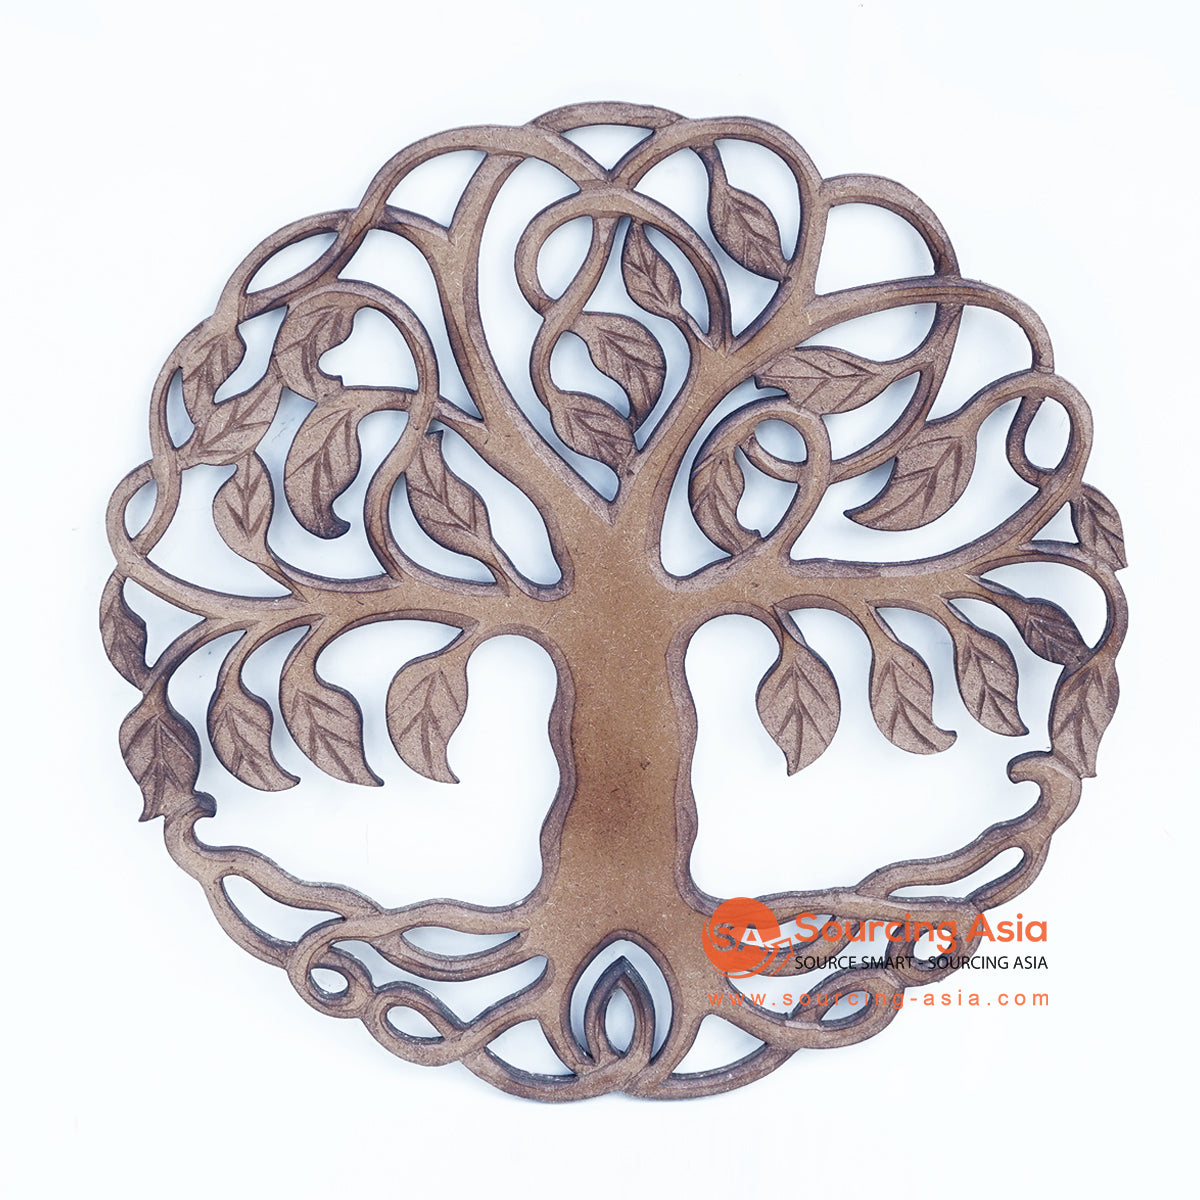 LUHC001 BROWN WOODEN ROUND "TREE OF LIFE" PANEL